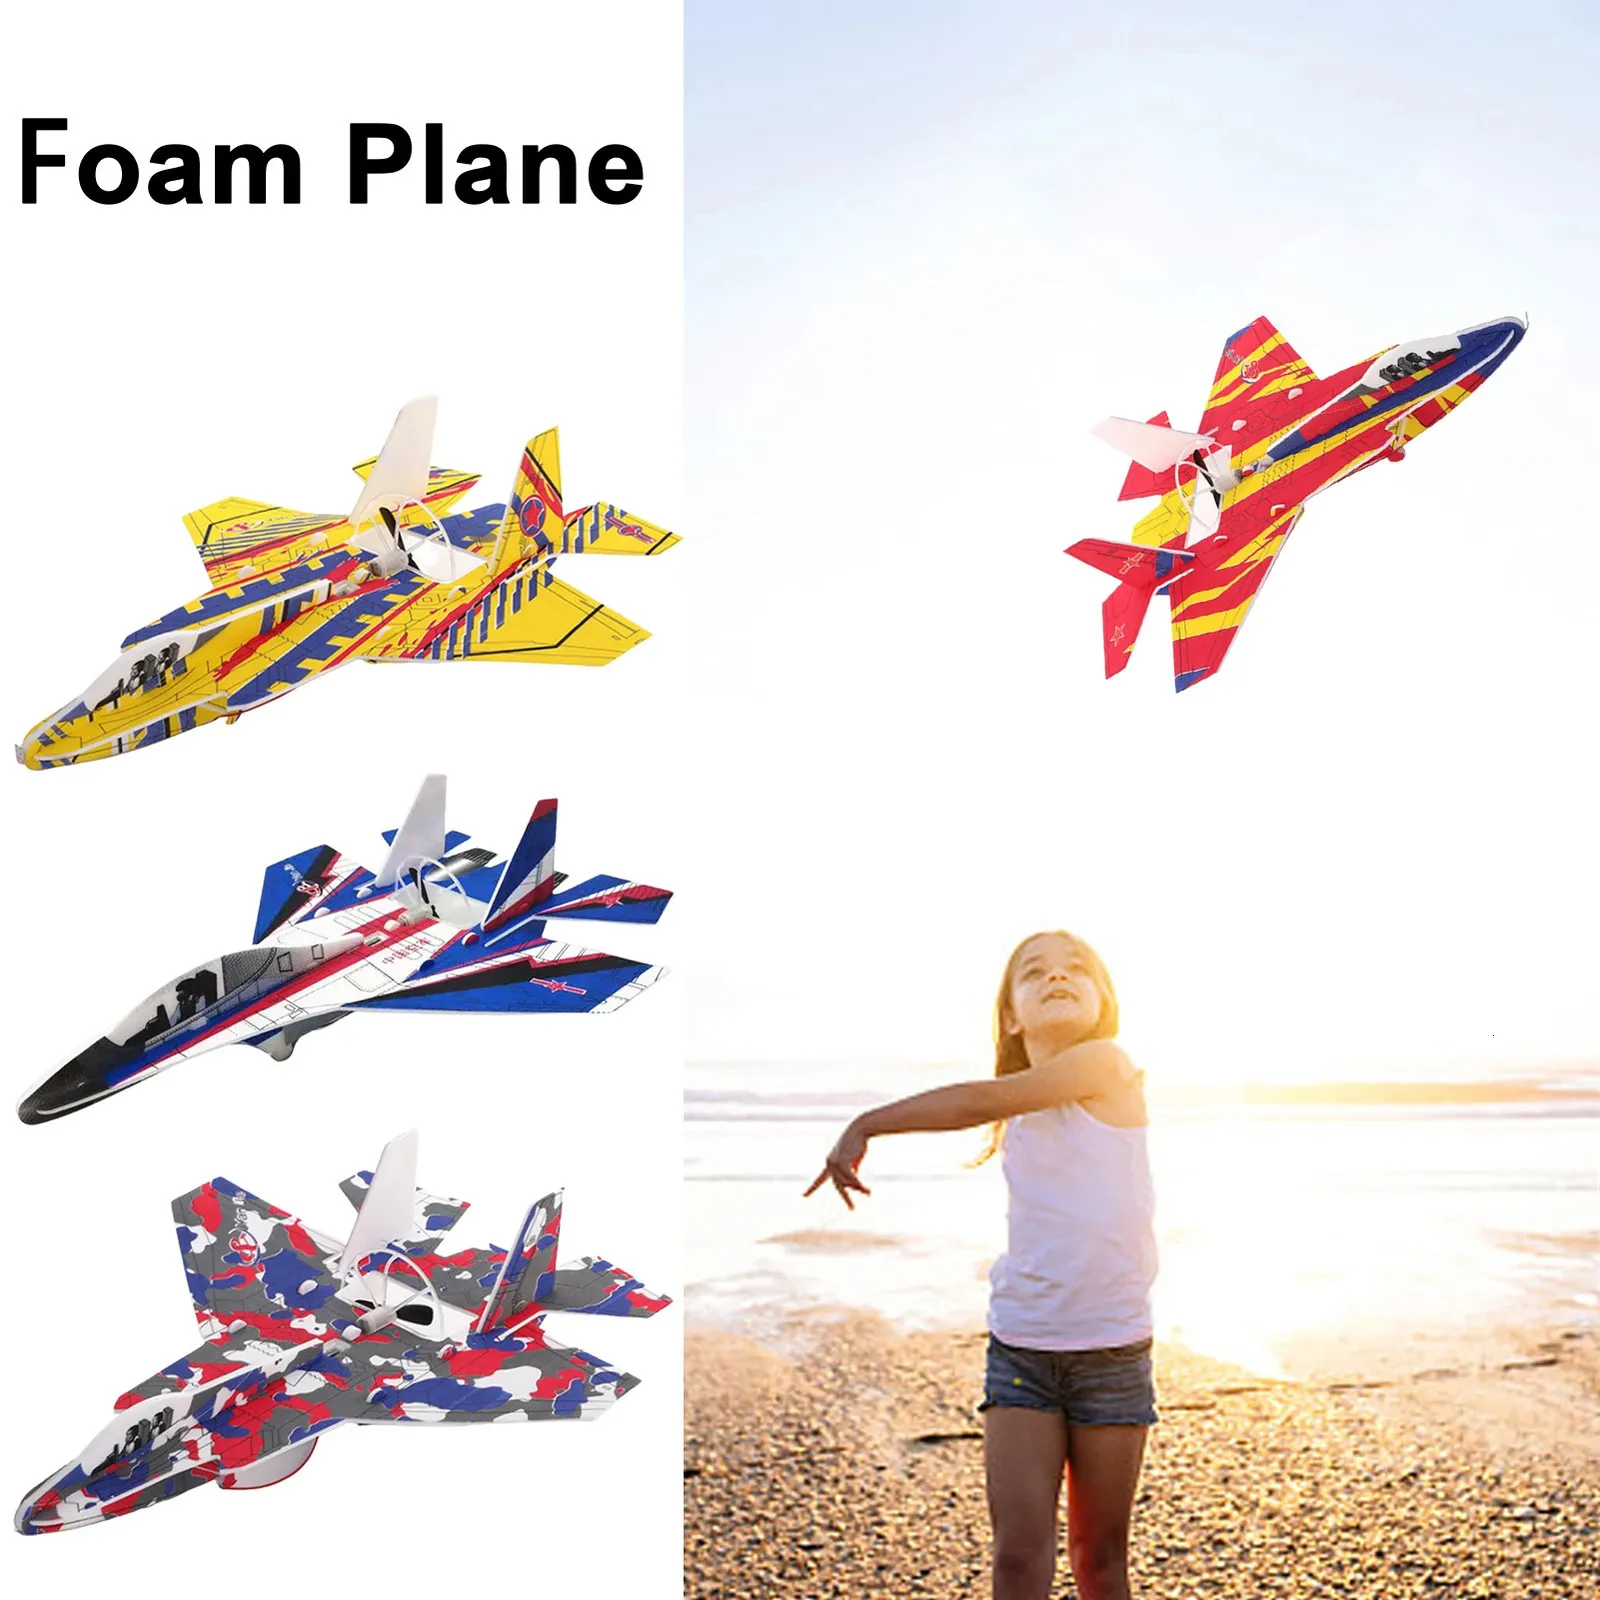 Electric Airplane Toy Rechargeble Throwing Foam Plane Flight Mode Glider Plane With Spinning Function Outdoor Flying Toys 240426